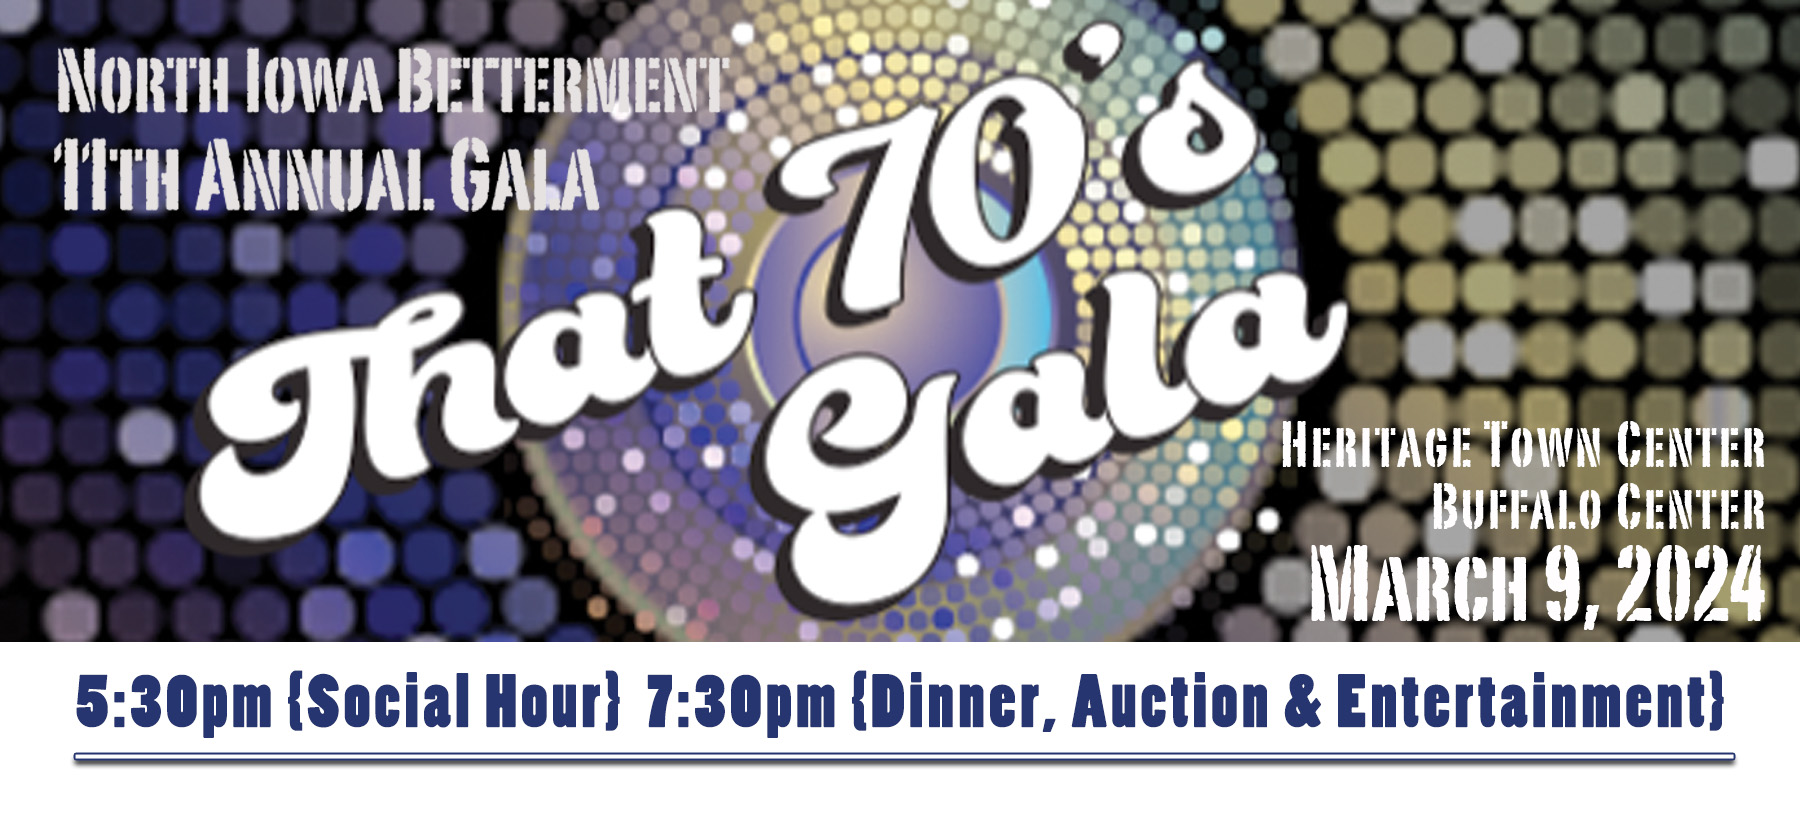 Event Promo Photo For North Iowa Betterment "That '70s Gala"